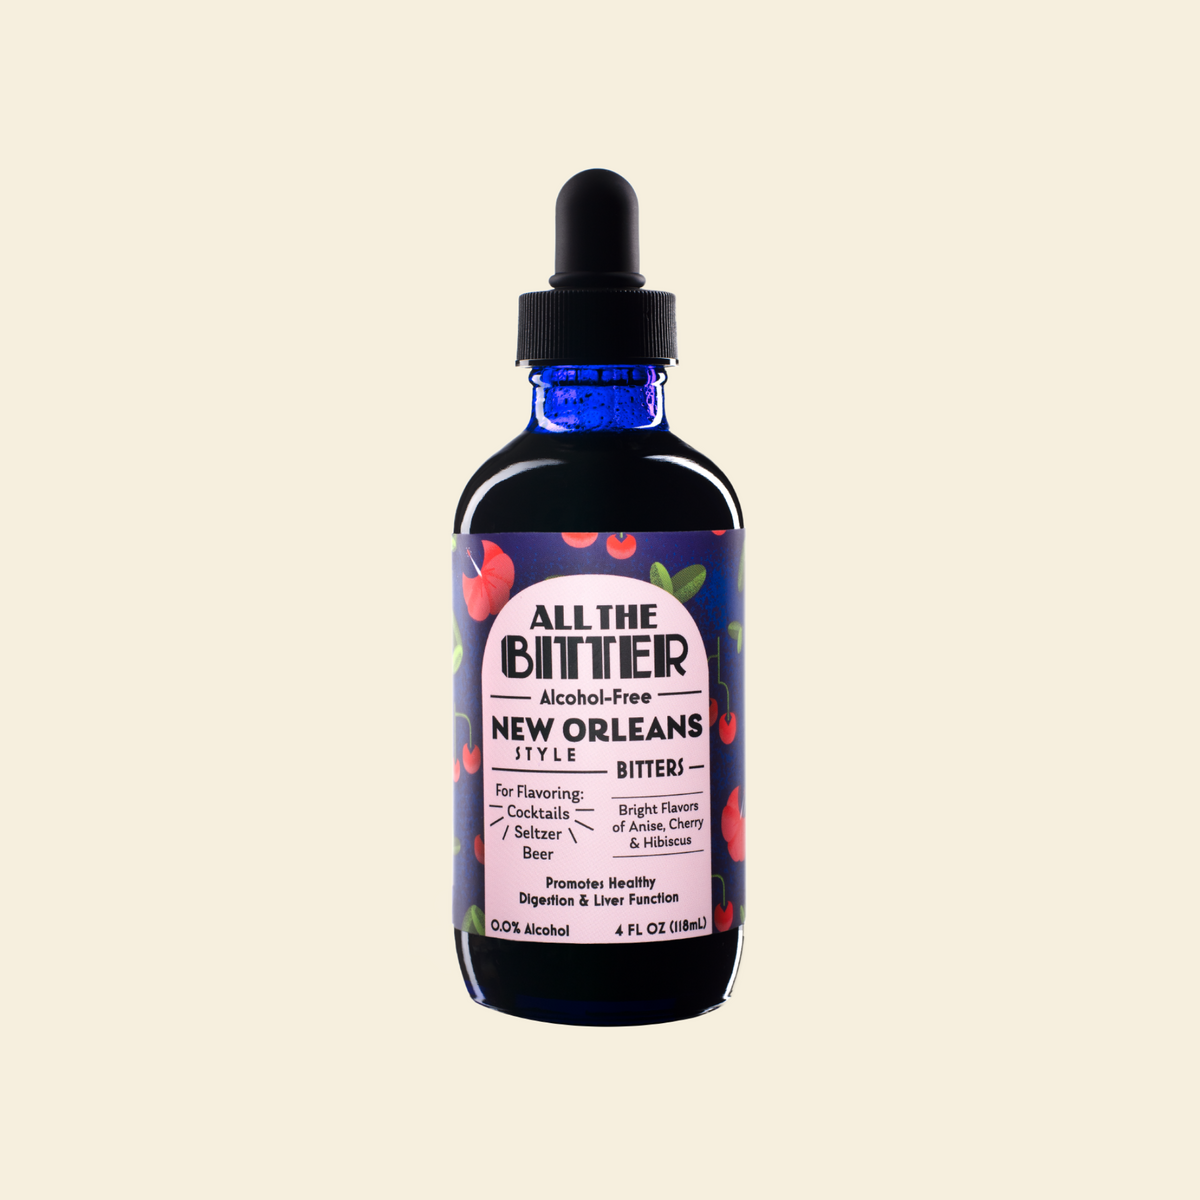 All The Bitter - New Orleans Bitters